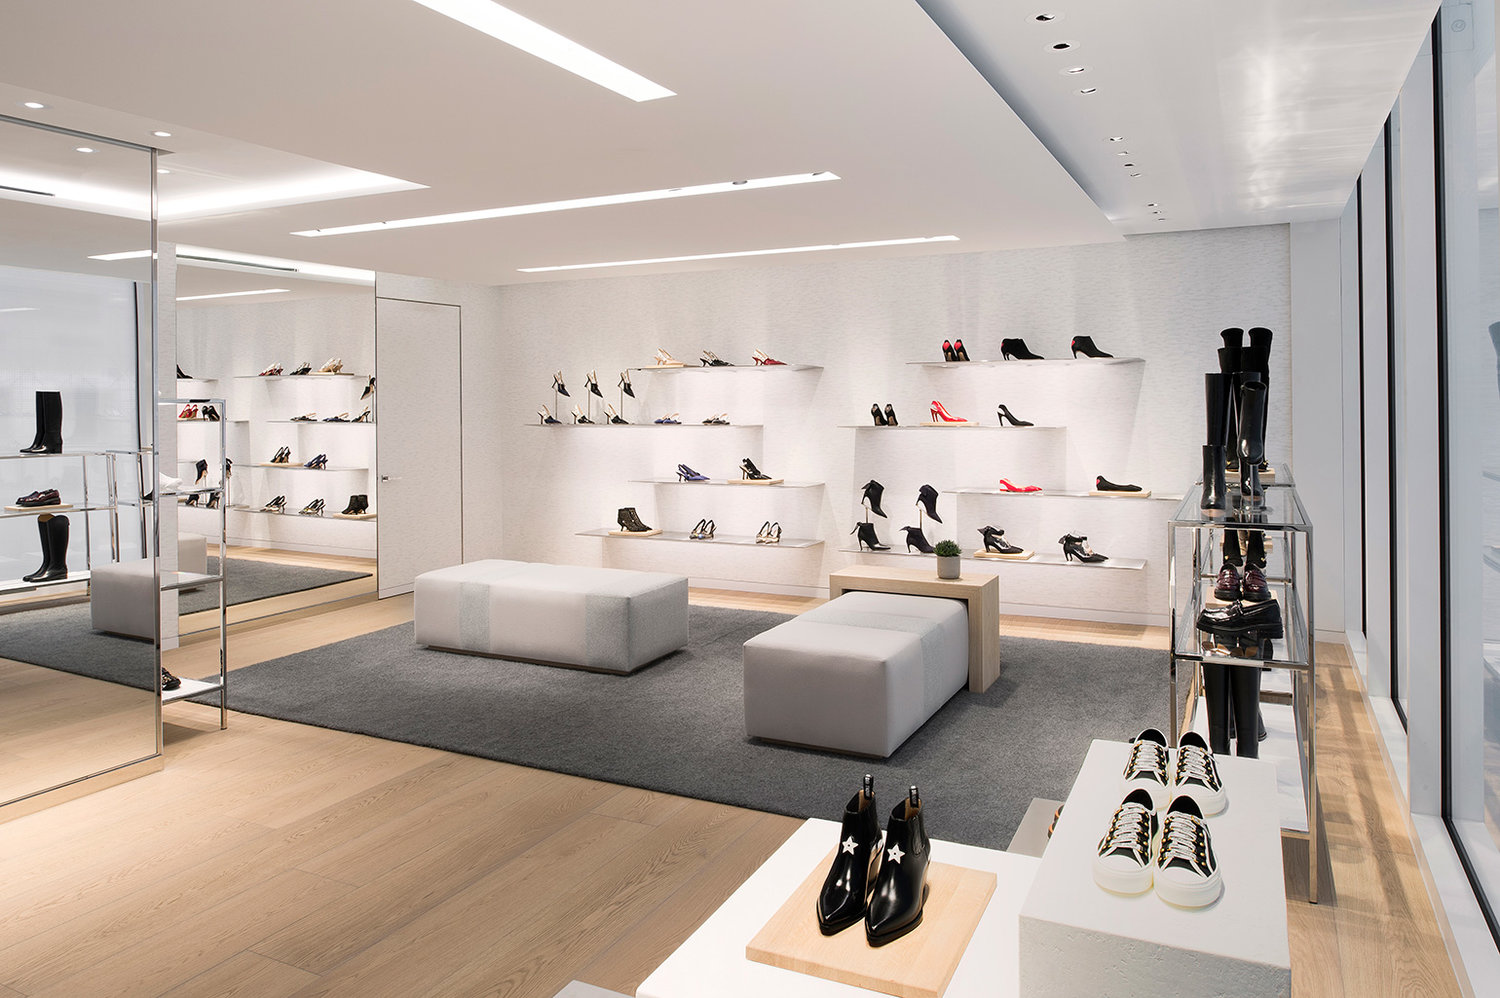 Dior Opens Its First Store in Michigan – WWD